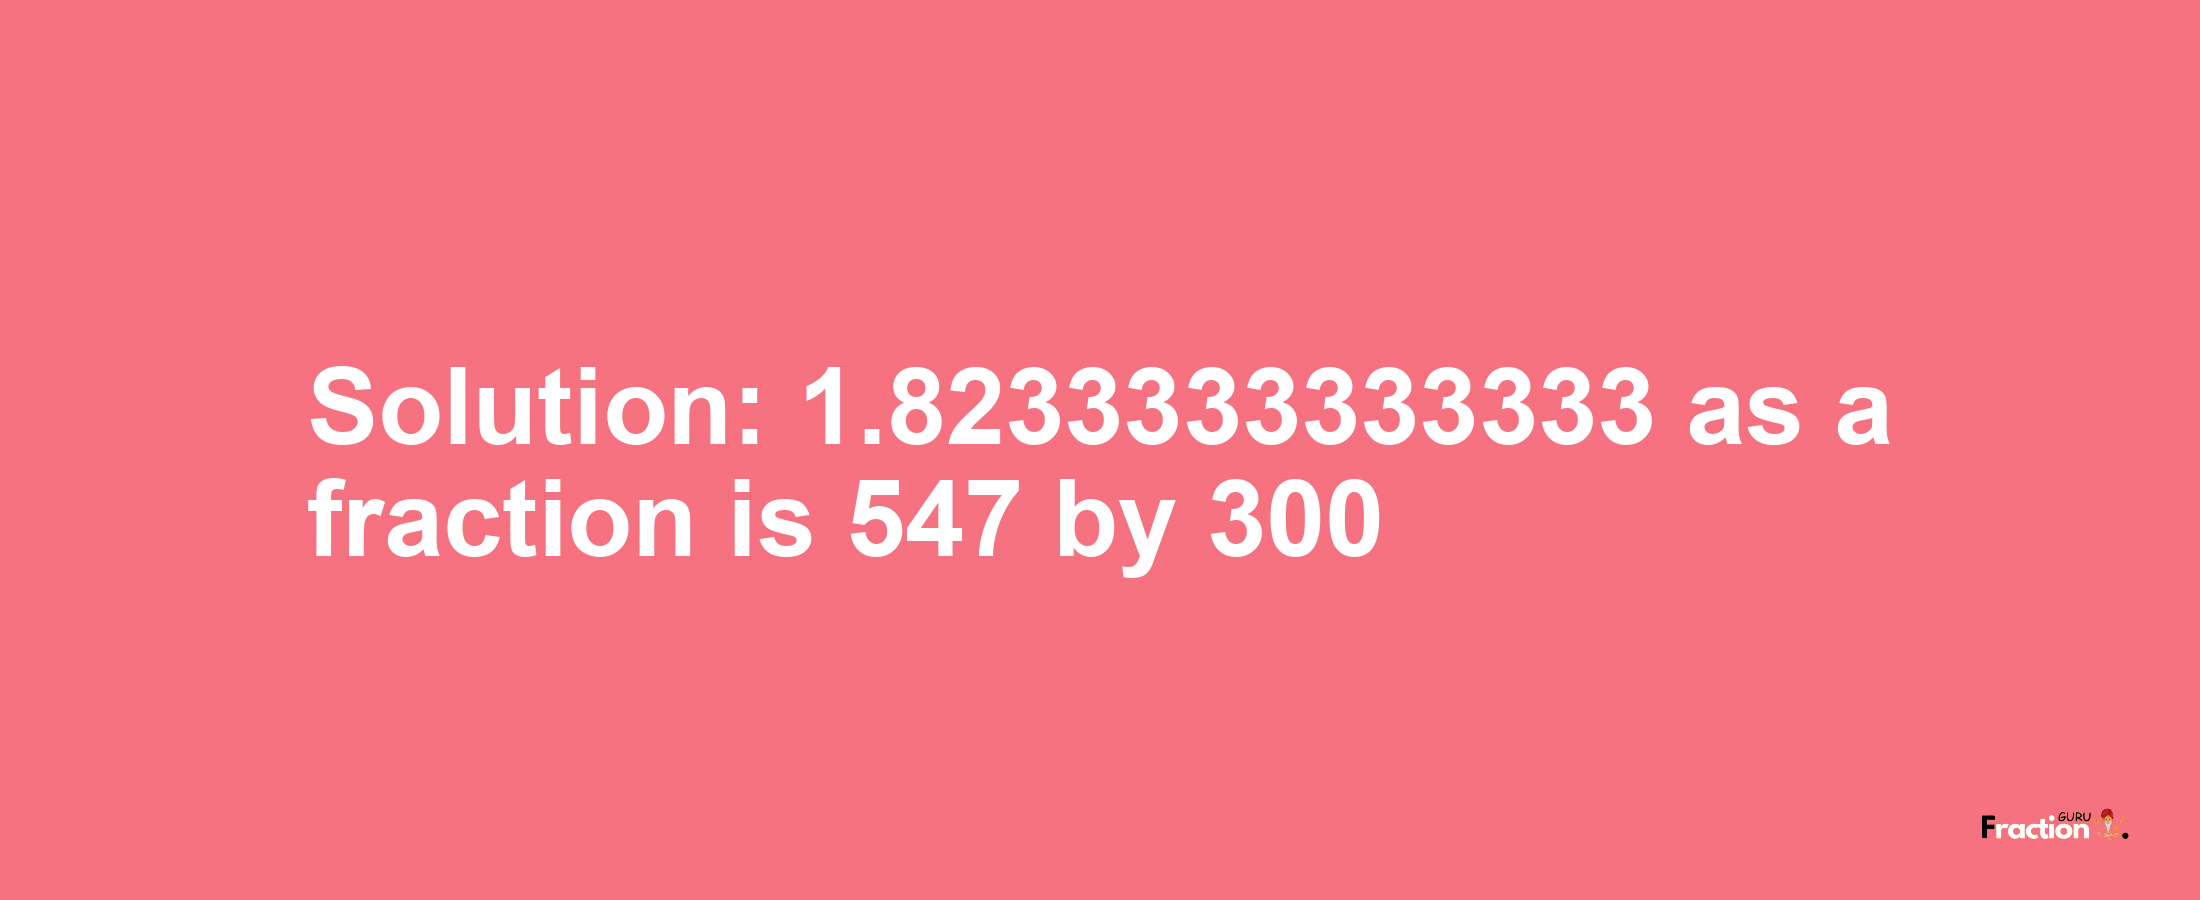 Solution:1.8233333333333 as a fraction is 547/300